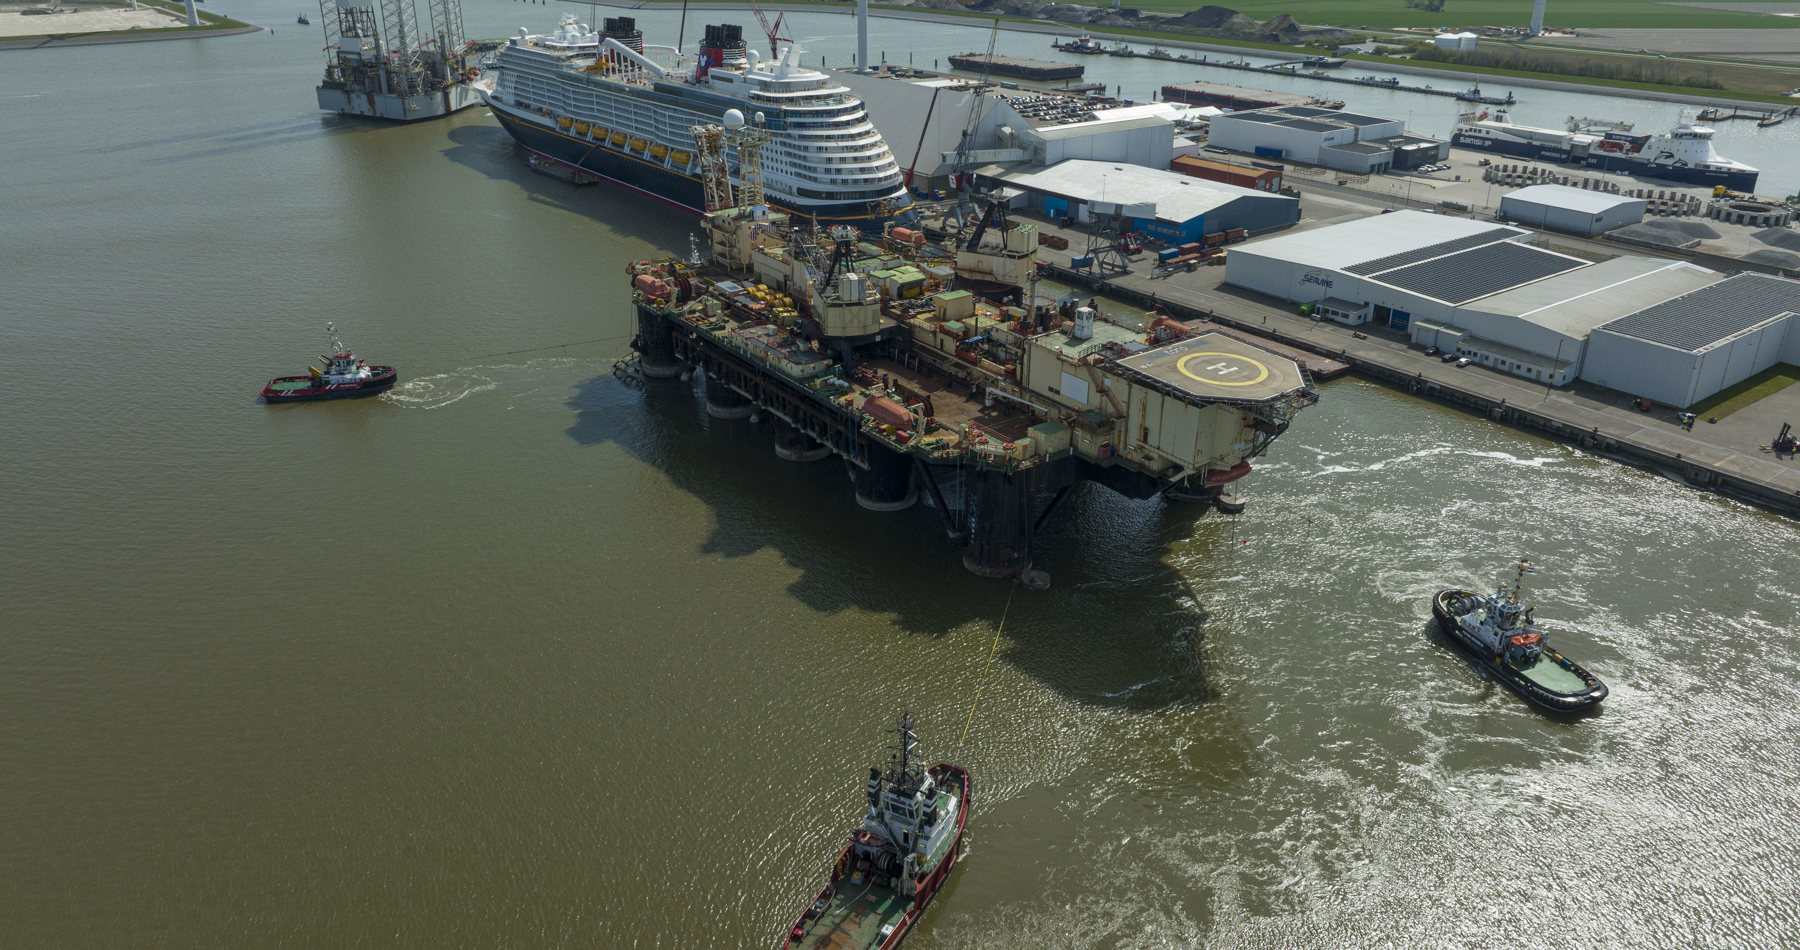 Port assistance for pipe laying platform ‘Toro’ in port of Eemshaven by Wagenborg